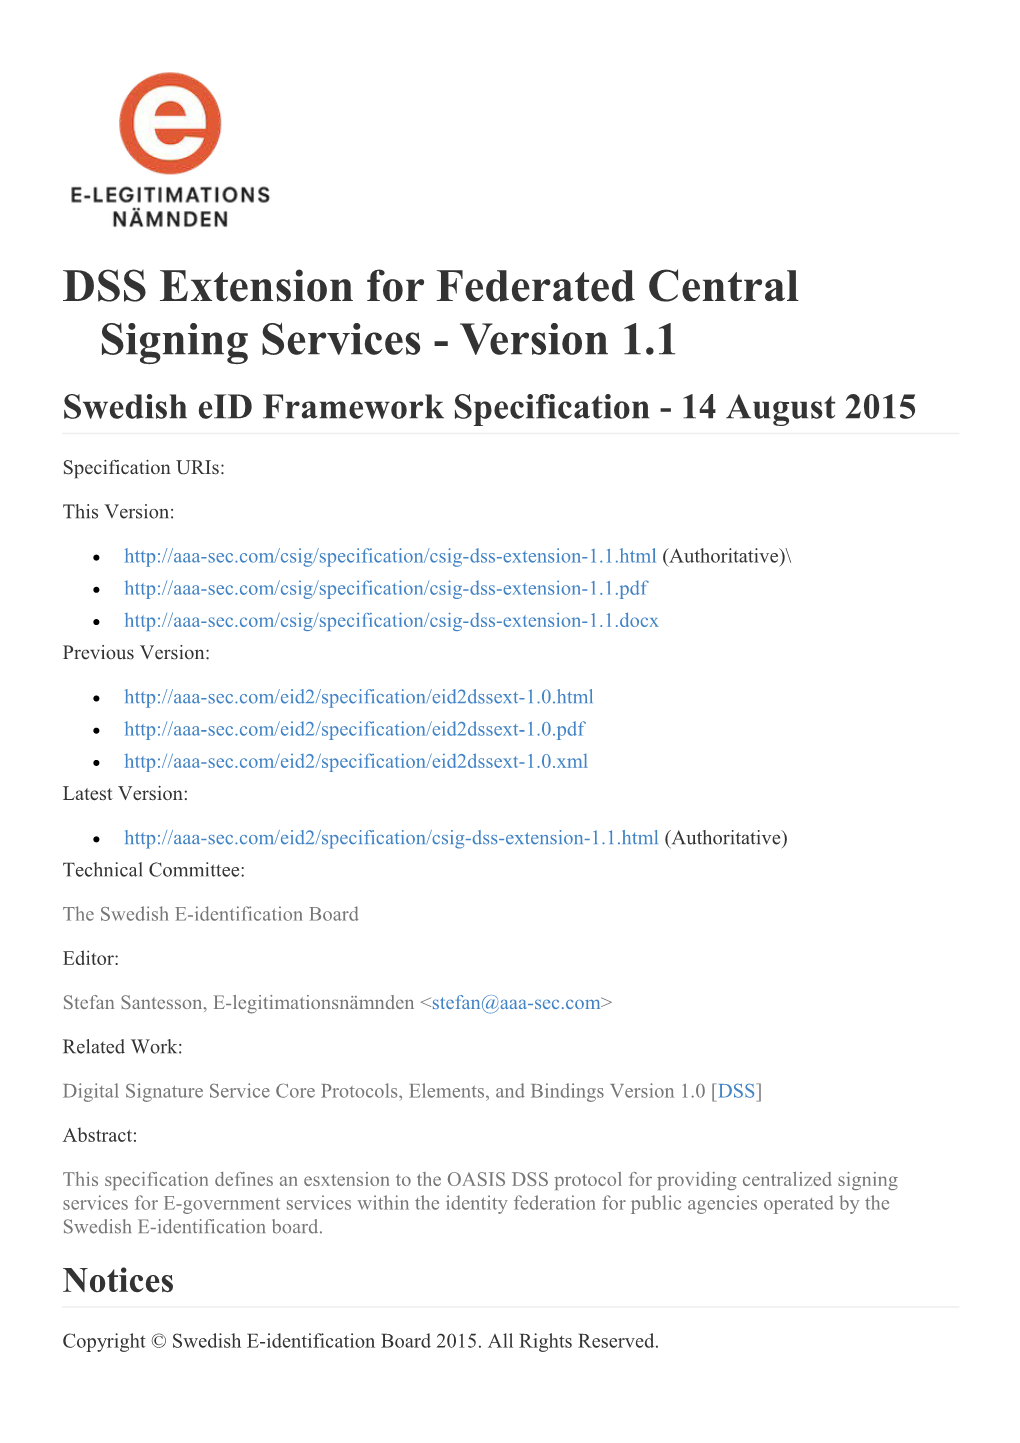 ELN-0609 - DSS Extension for Federated Signing Services